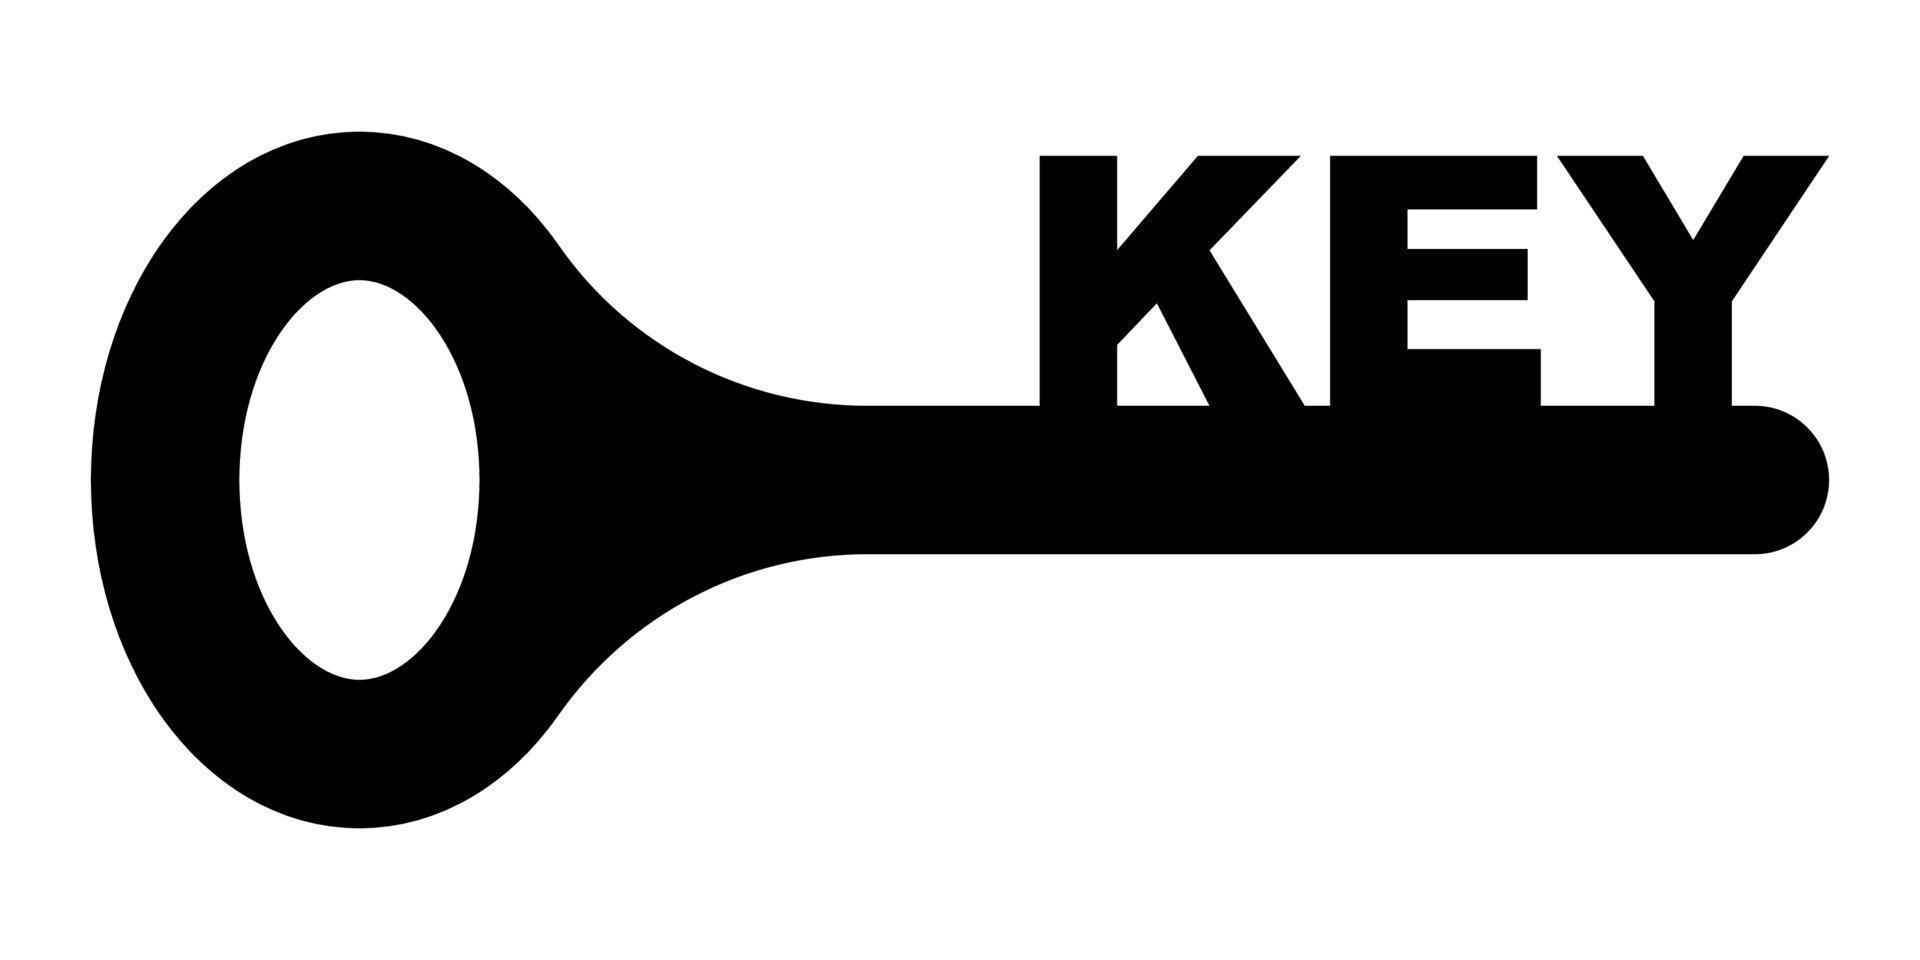 silhouette shape of a key, the symbol open, vector key concept of opening